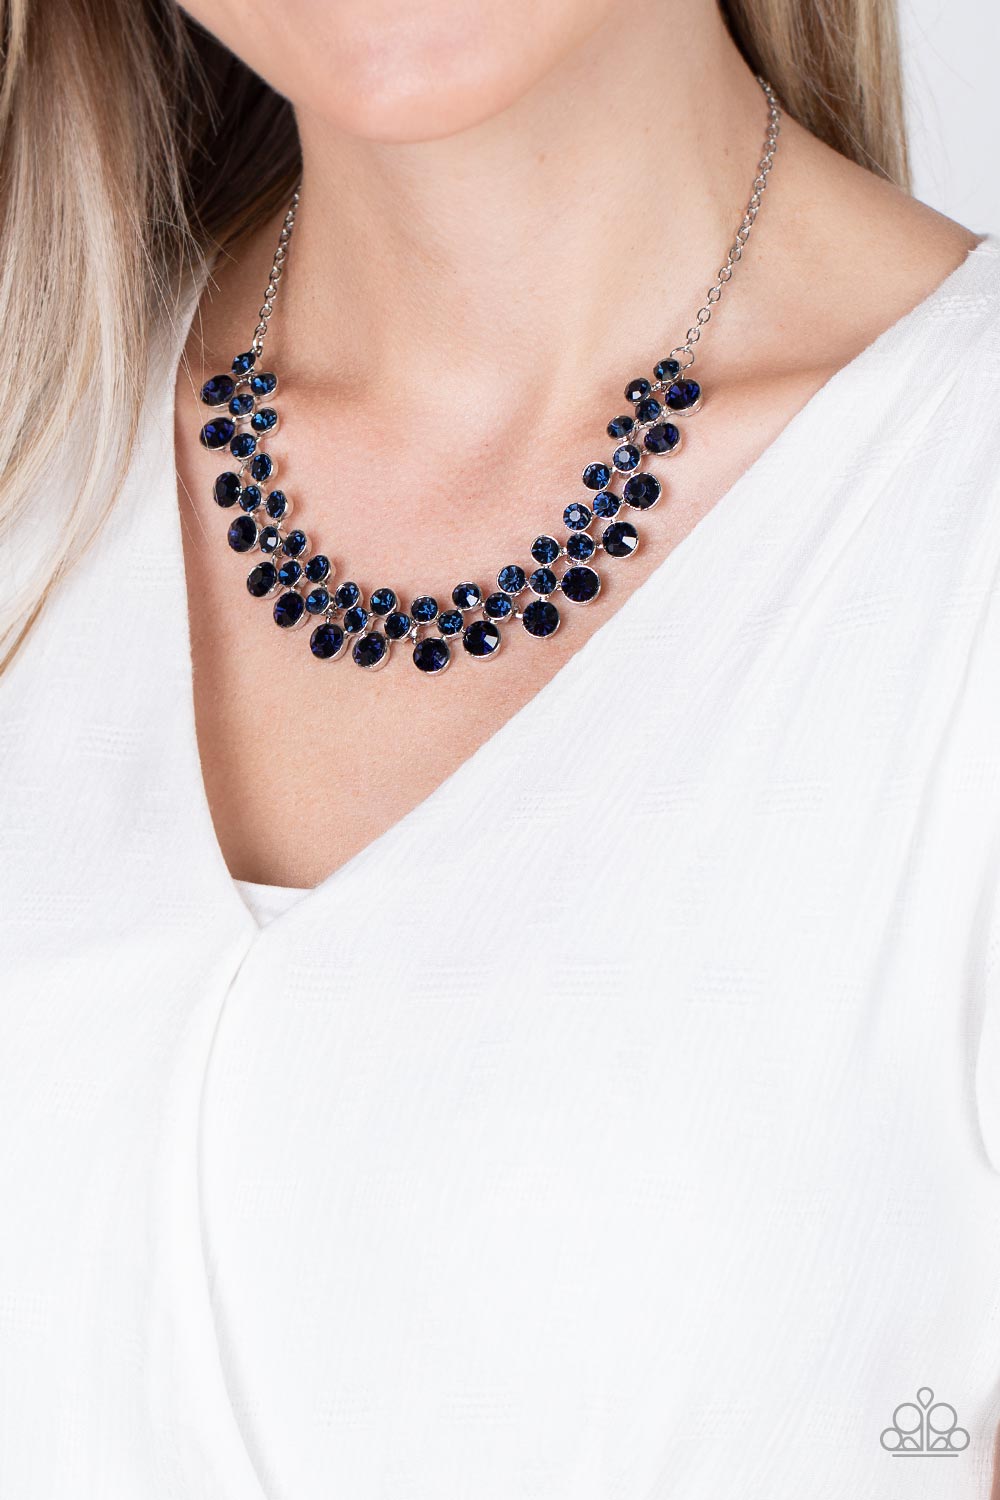 Won The Lottery Blue Rhinestone Necklace - Paparazzi Accessories-on model - CarasShop.com - $5 Jewelry by Cara Jewels